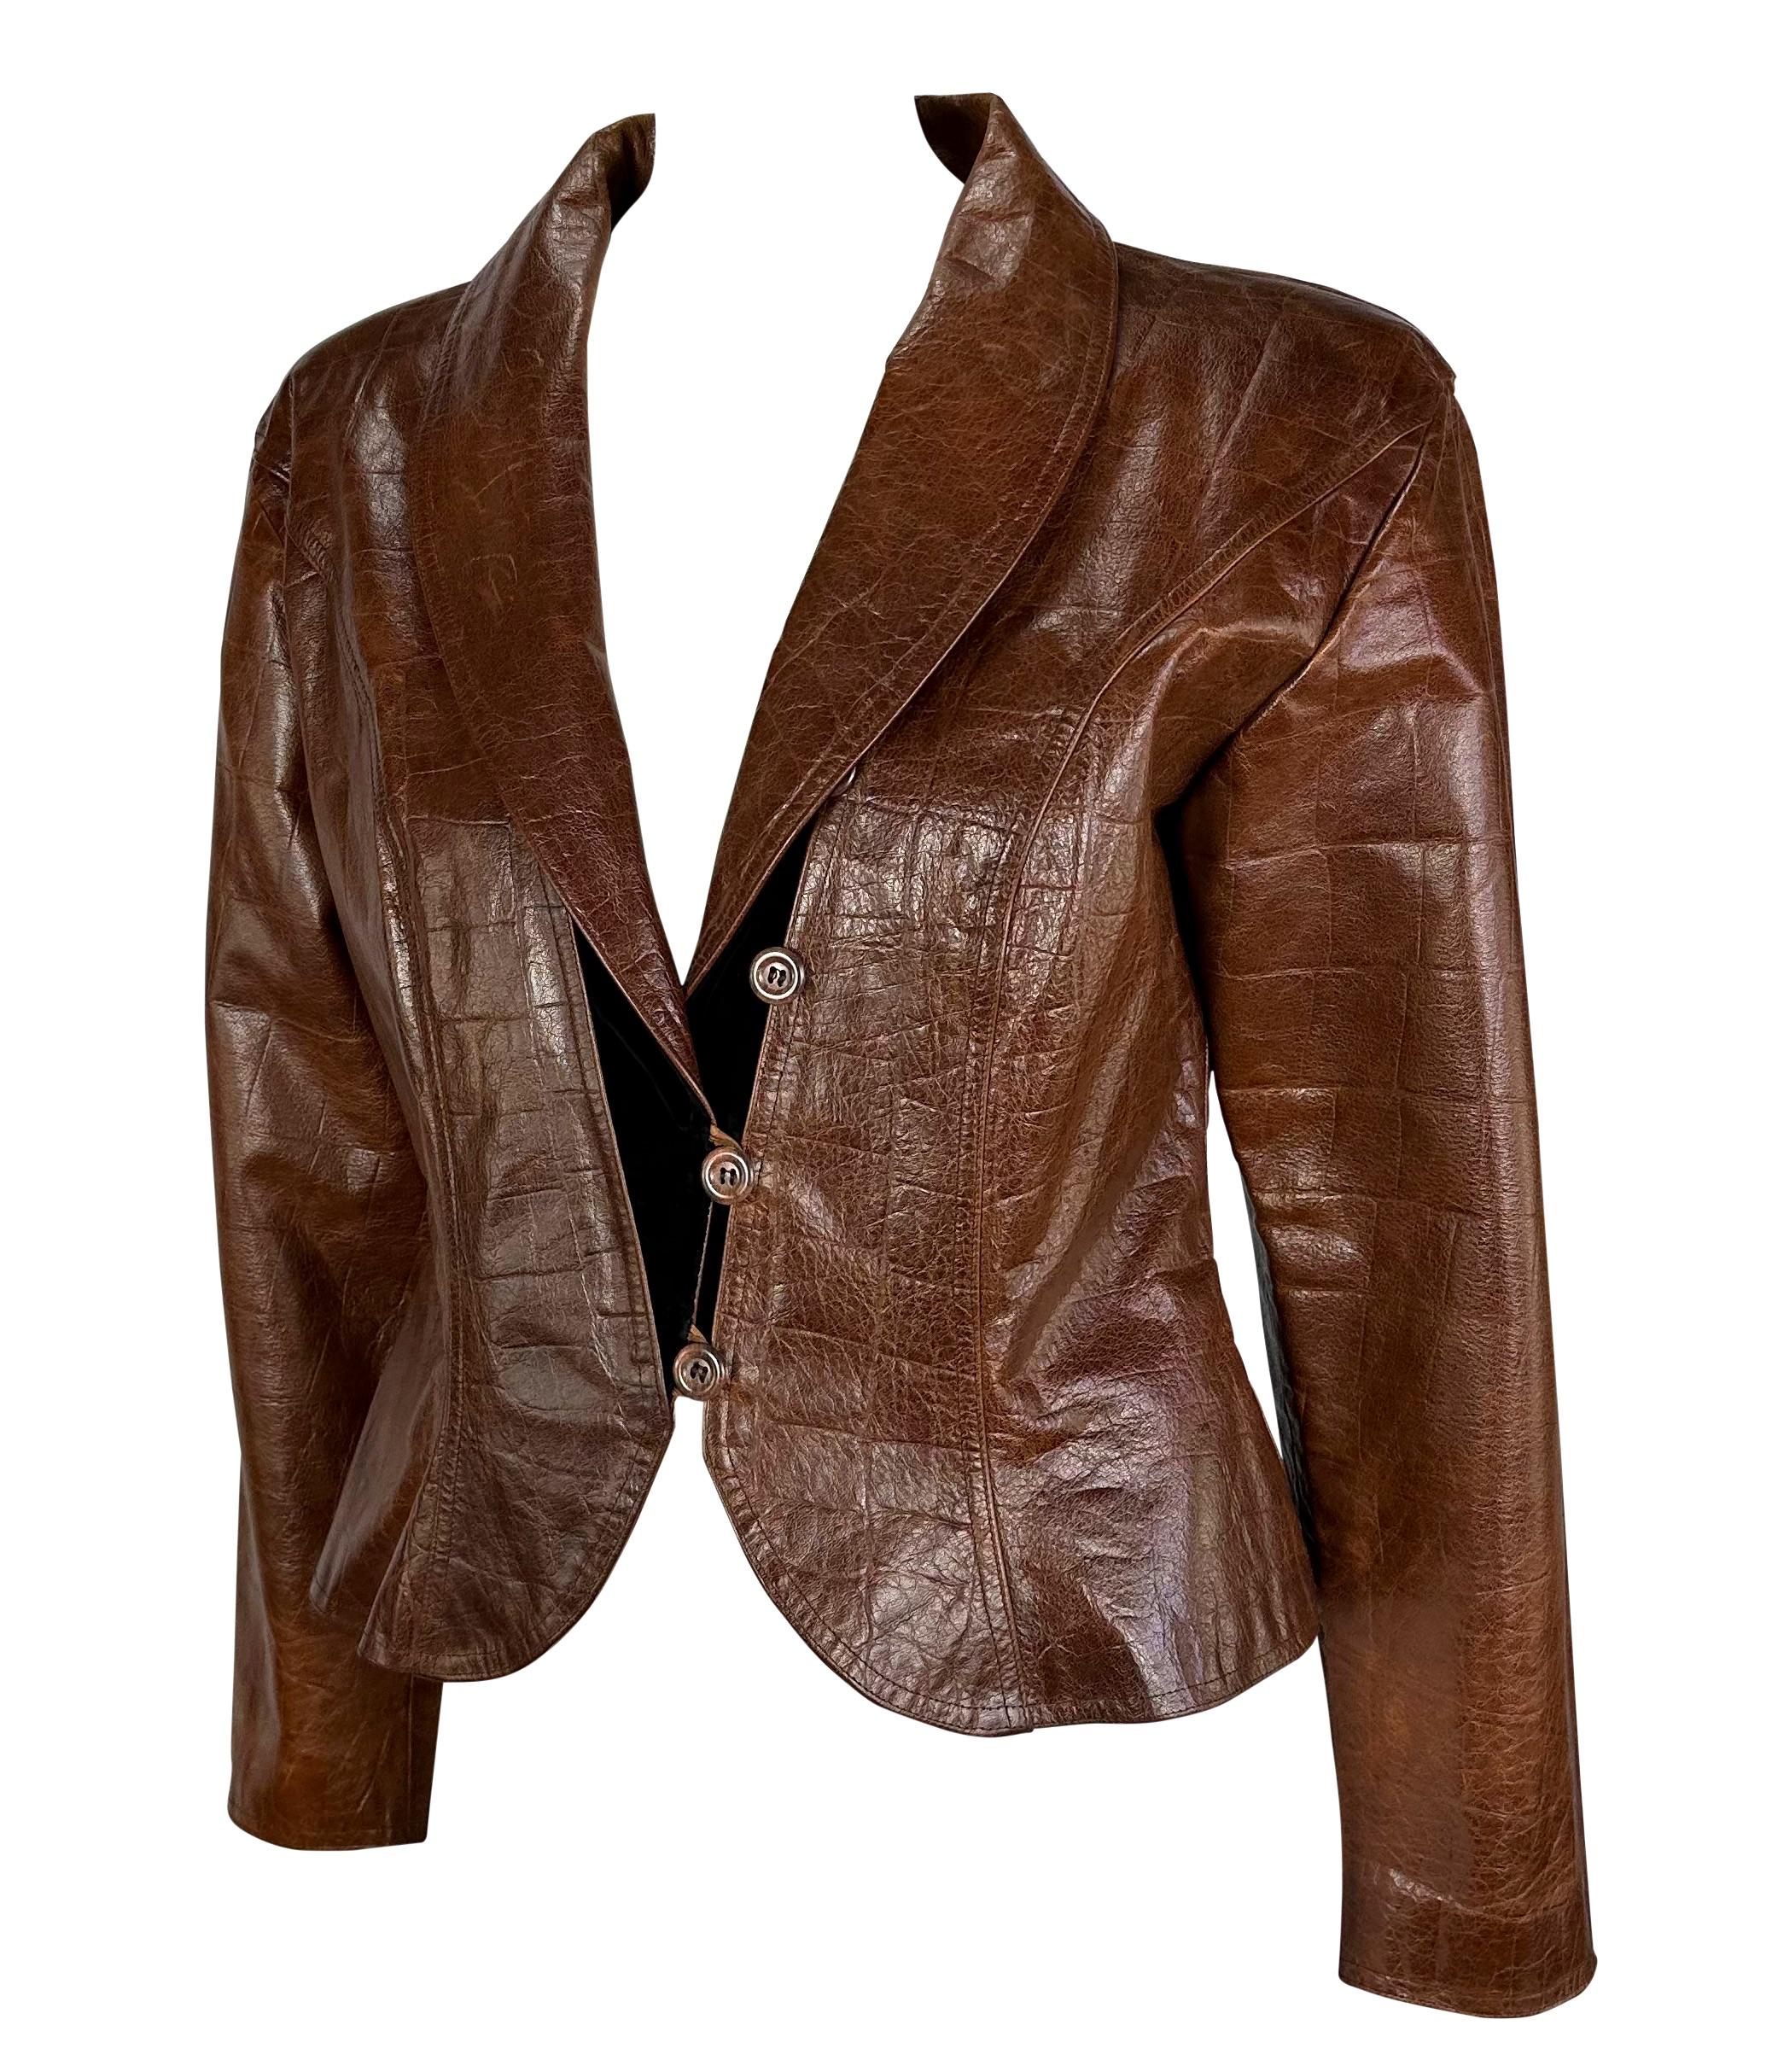 Presenting a fabulous brown crocodile embossed Emanuel Ungaro leather jacket. From the 1980s, this fabulous jacket features a peplum flare hem, black velvet detailing, and a shawl lapel. Add this fabulous vintage piece to your wardrobe!